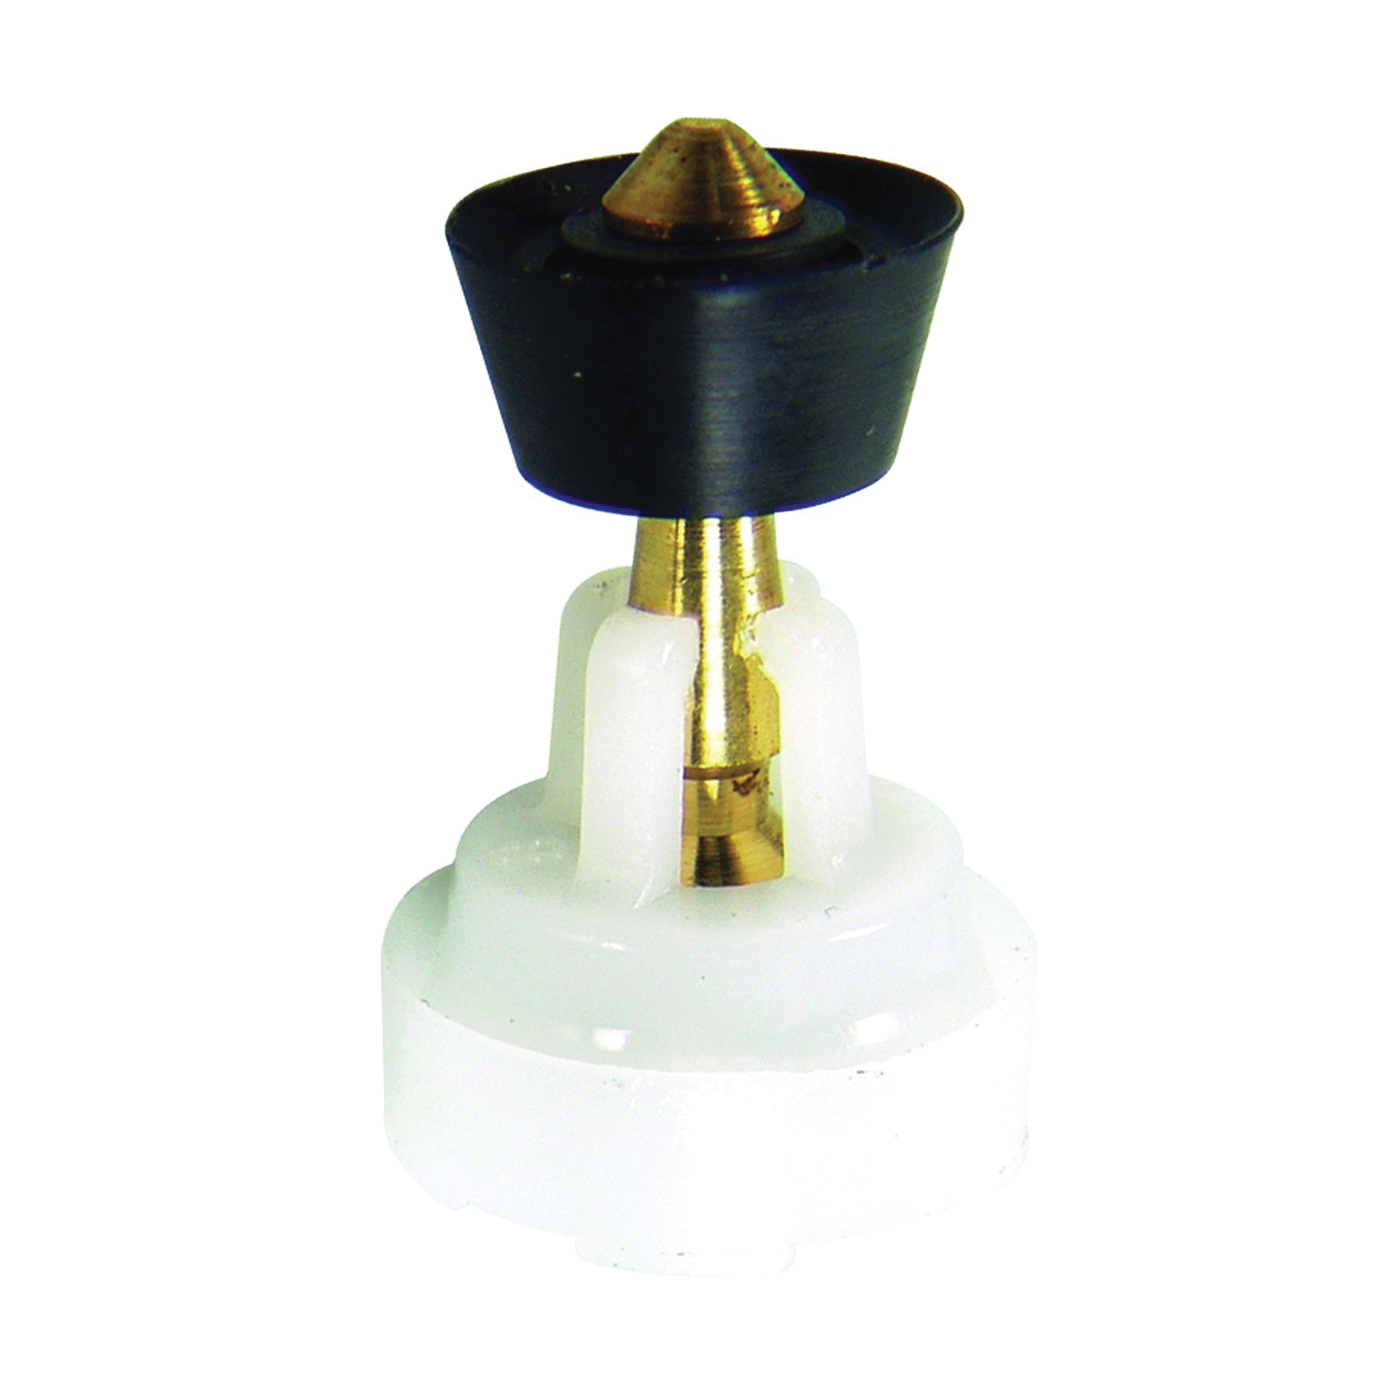 80093E Faucet Spray Diverter, Brass/Plastic/Rubber, For: Delta/Peerless Single Handle Kitchen Sink Faucets